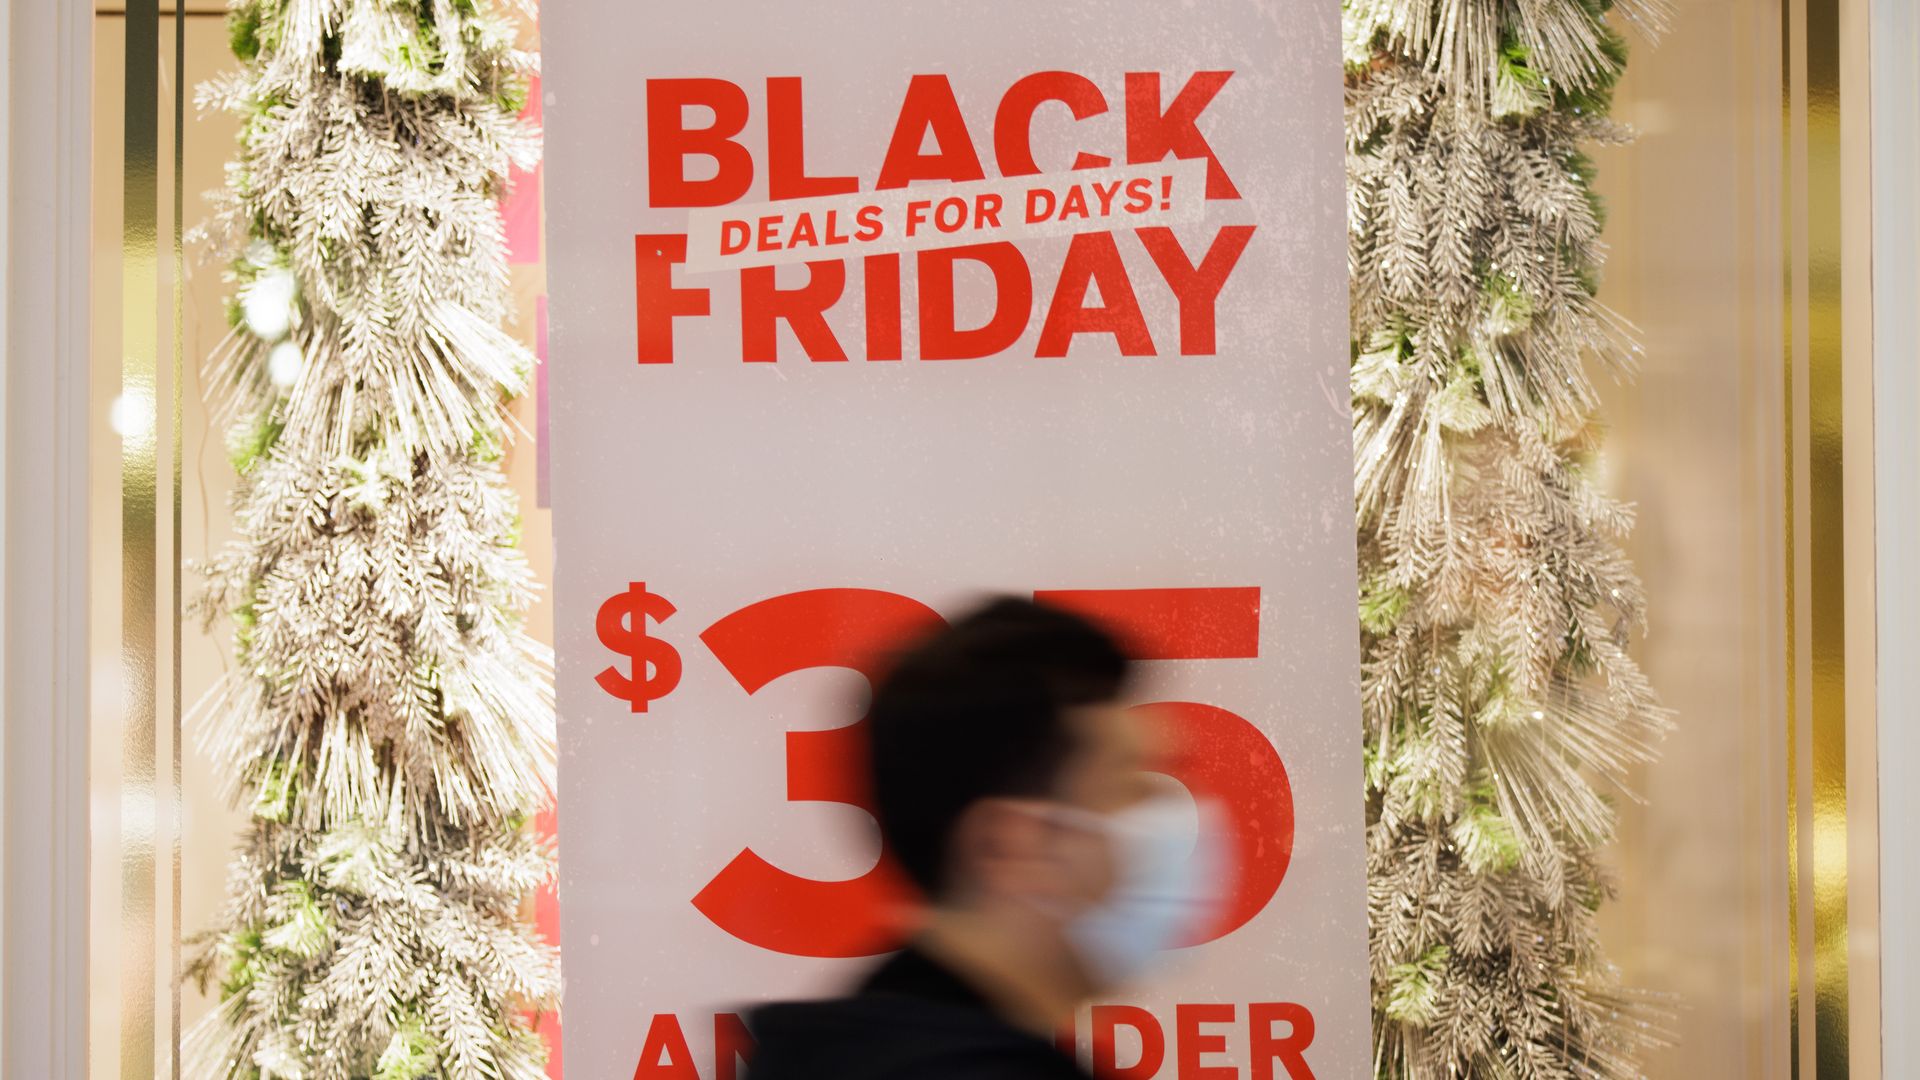 Shopper wearing a mask walks by a sign that says "Black Friday deals for days."